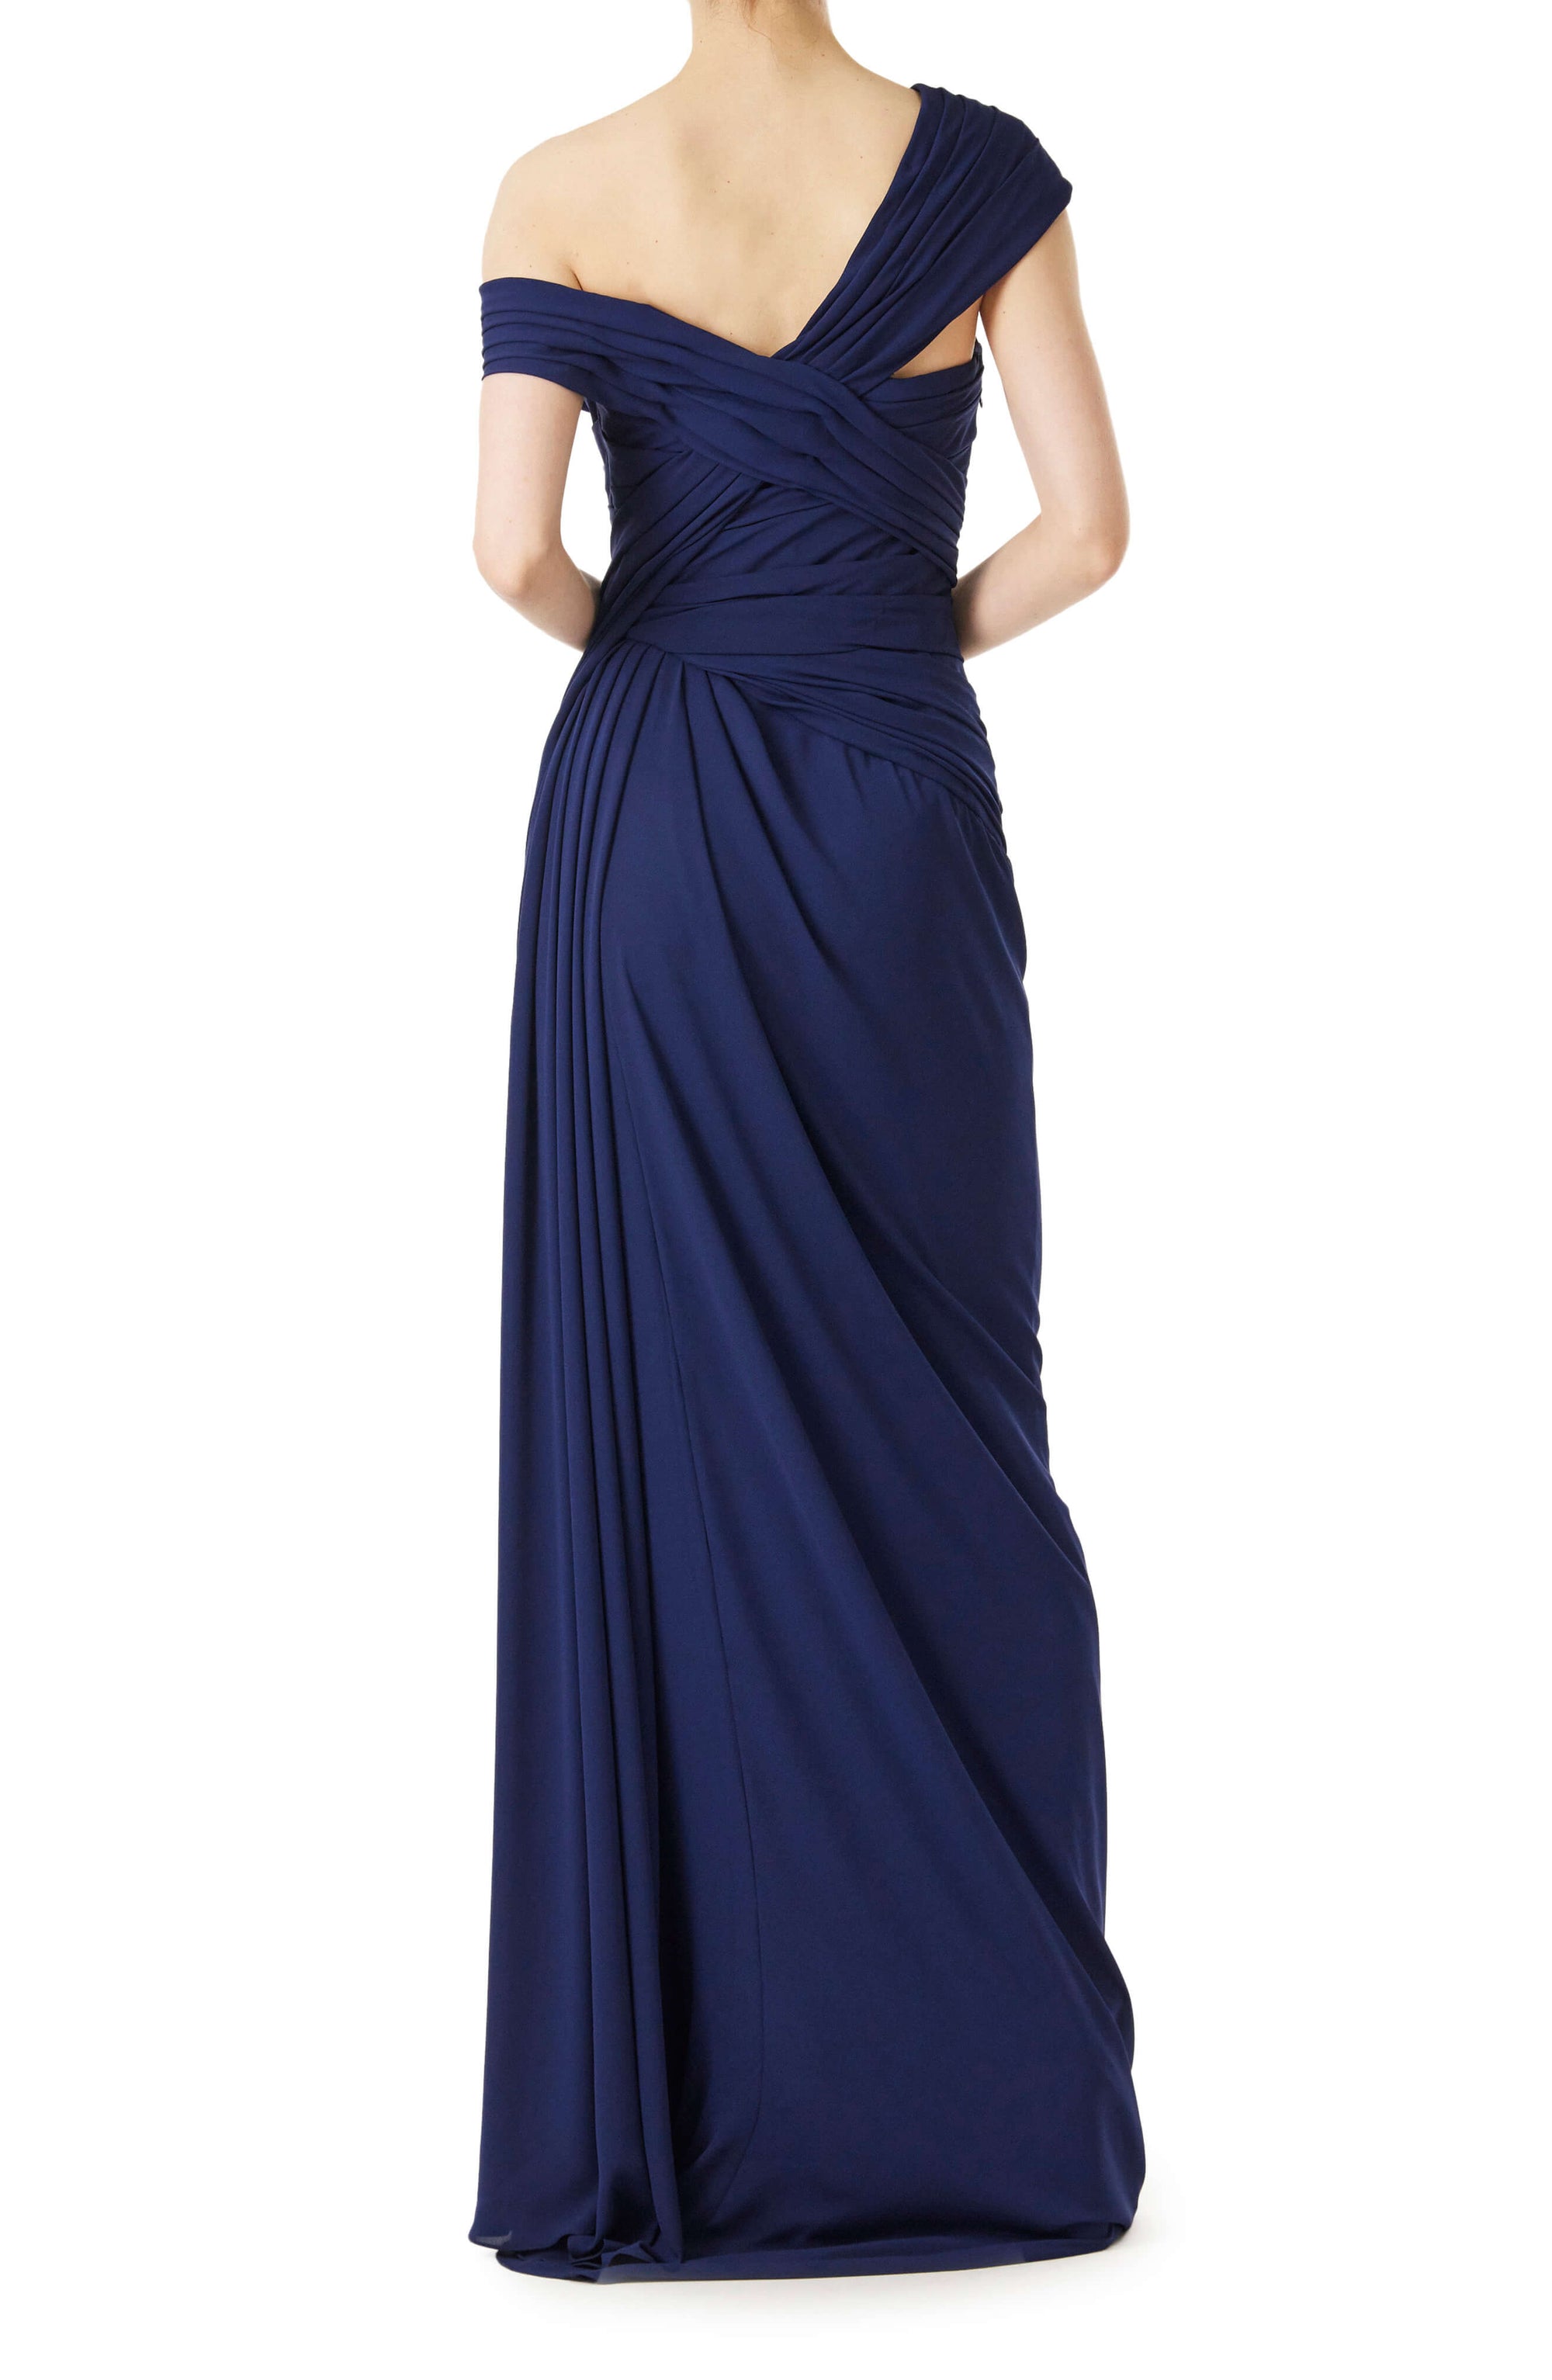 Monique Lhuillier navy gown with draped neckline and high leg slit in jersey chiffon fabric.